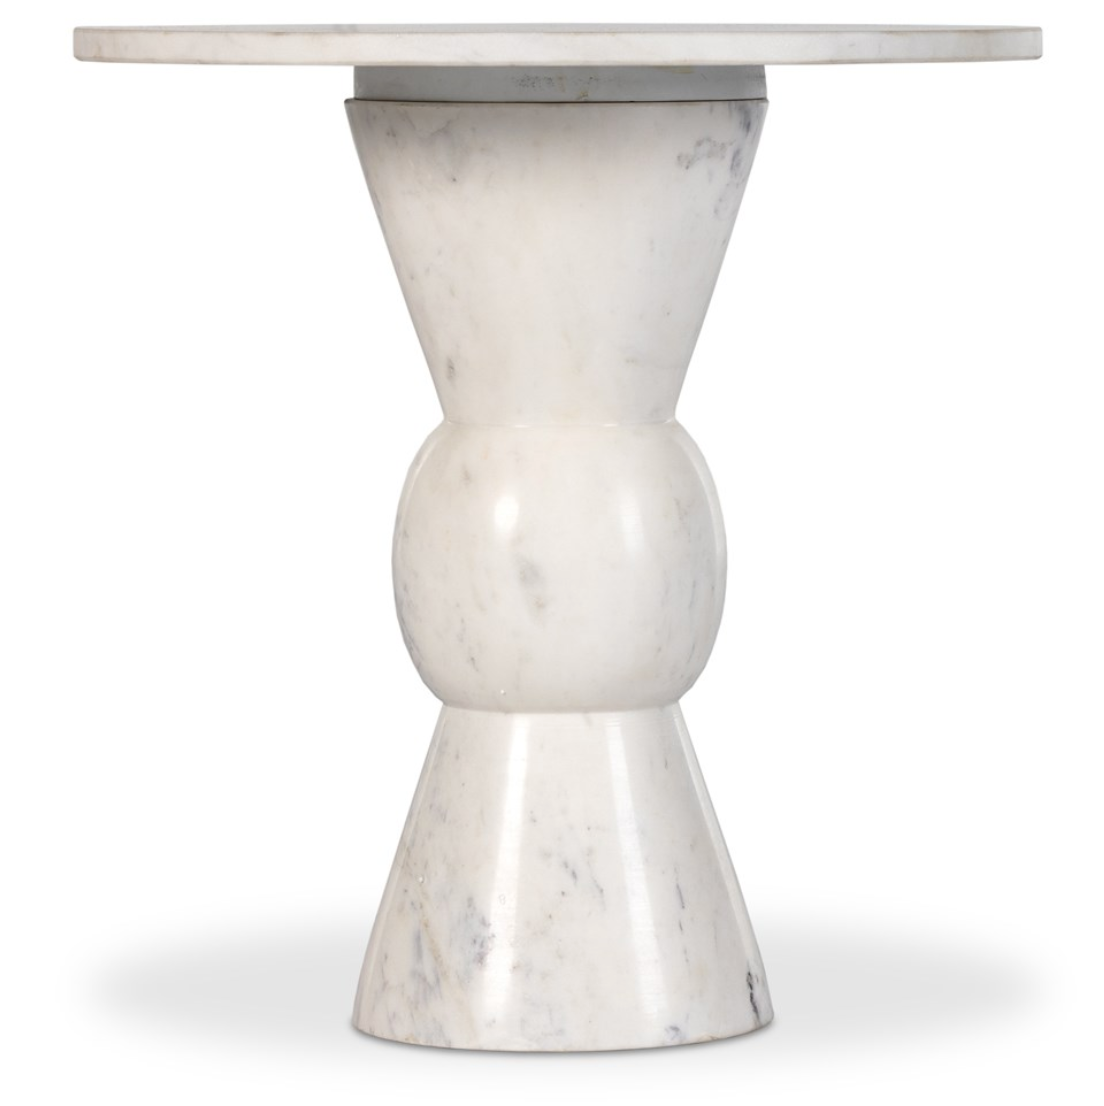 Fox Polished White Marble End Table